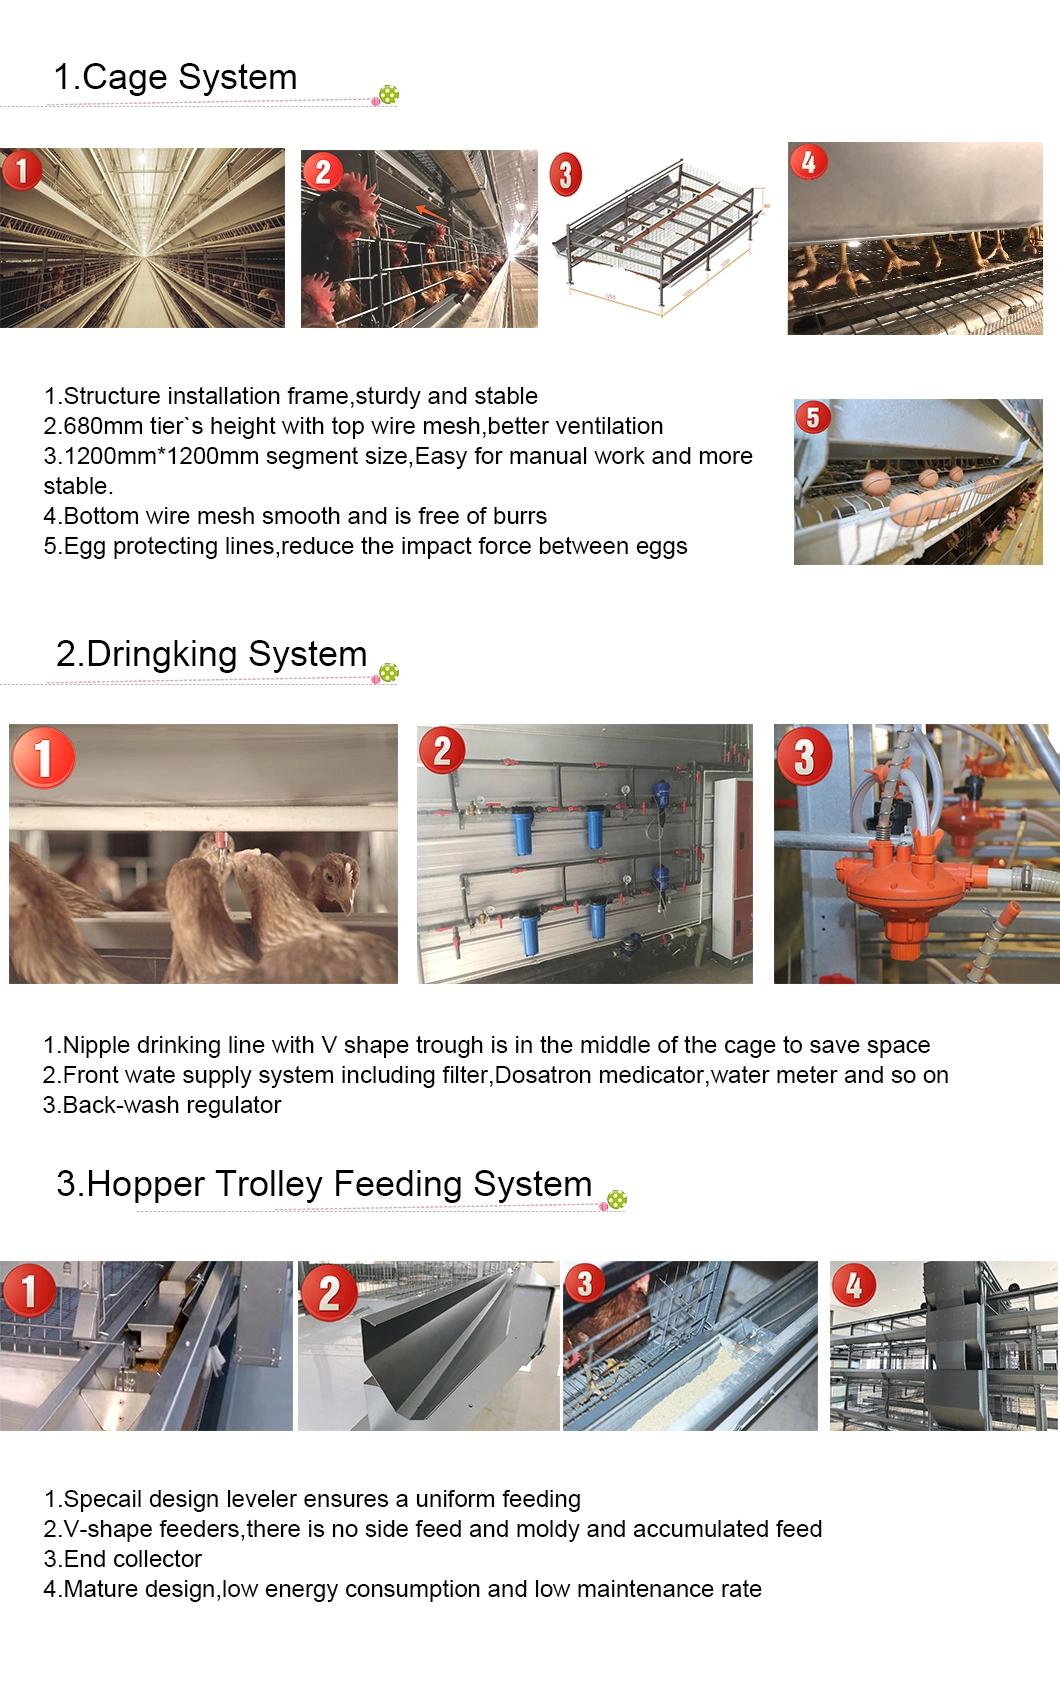 Longfeng Automatic Computerized Dosing Medicine and Spray Disinfection Poultry Chicken Cages